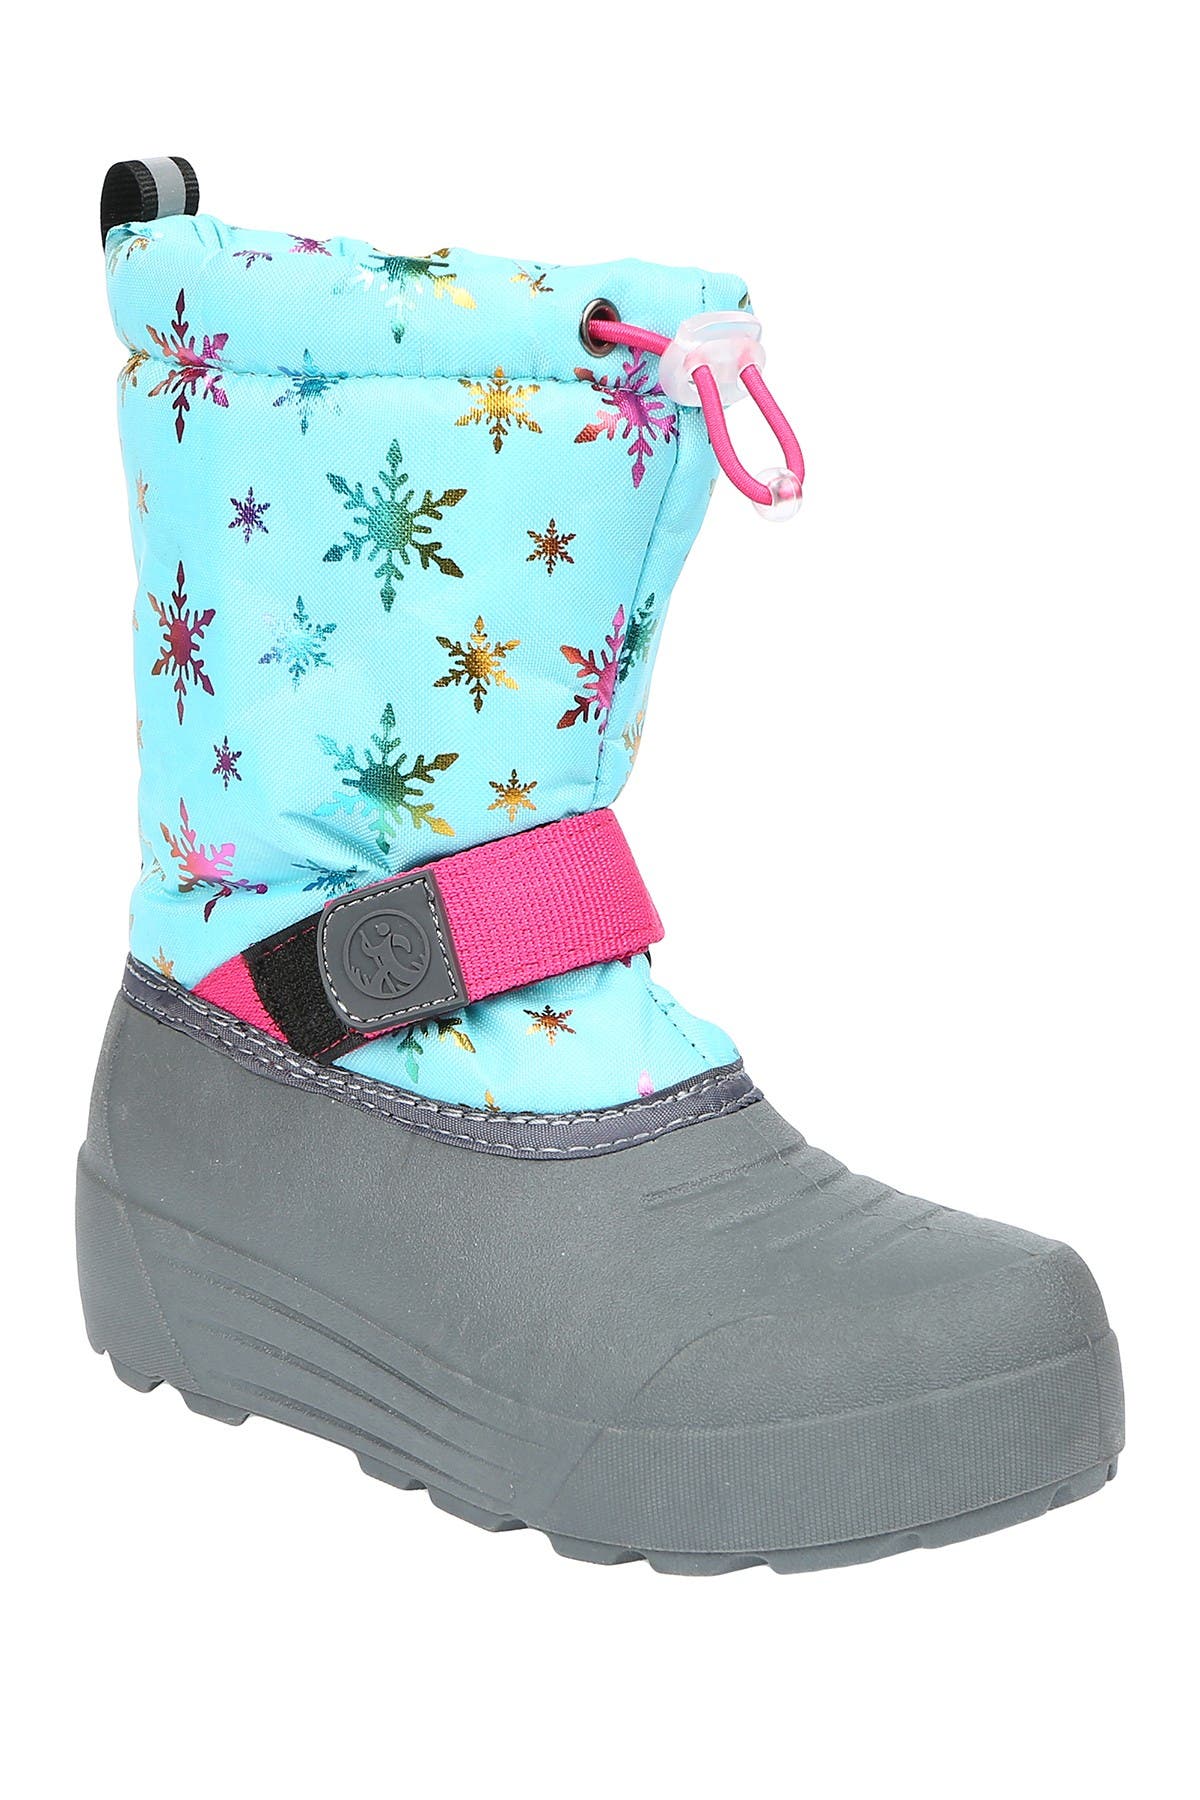 northside frosty winter snow boot